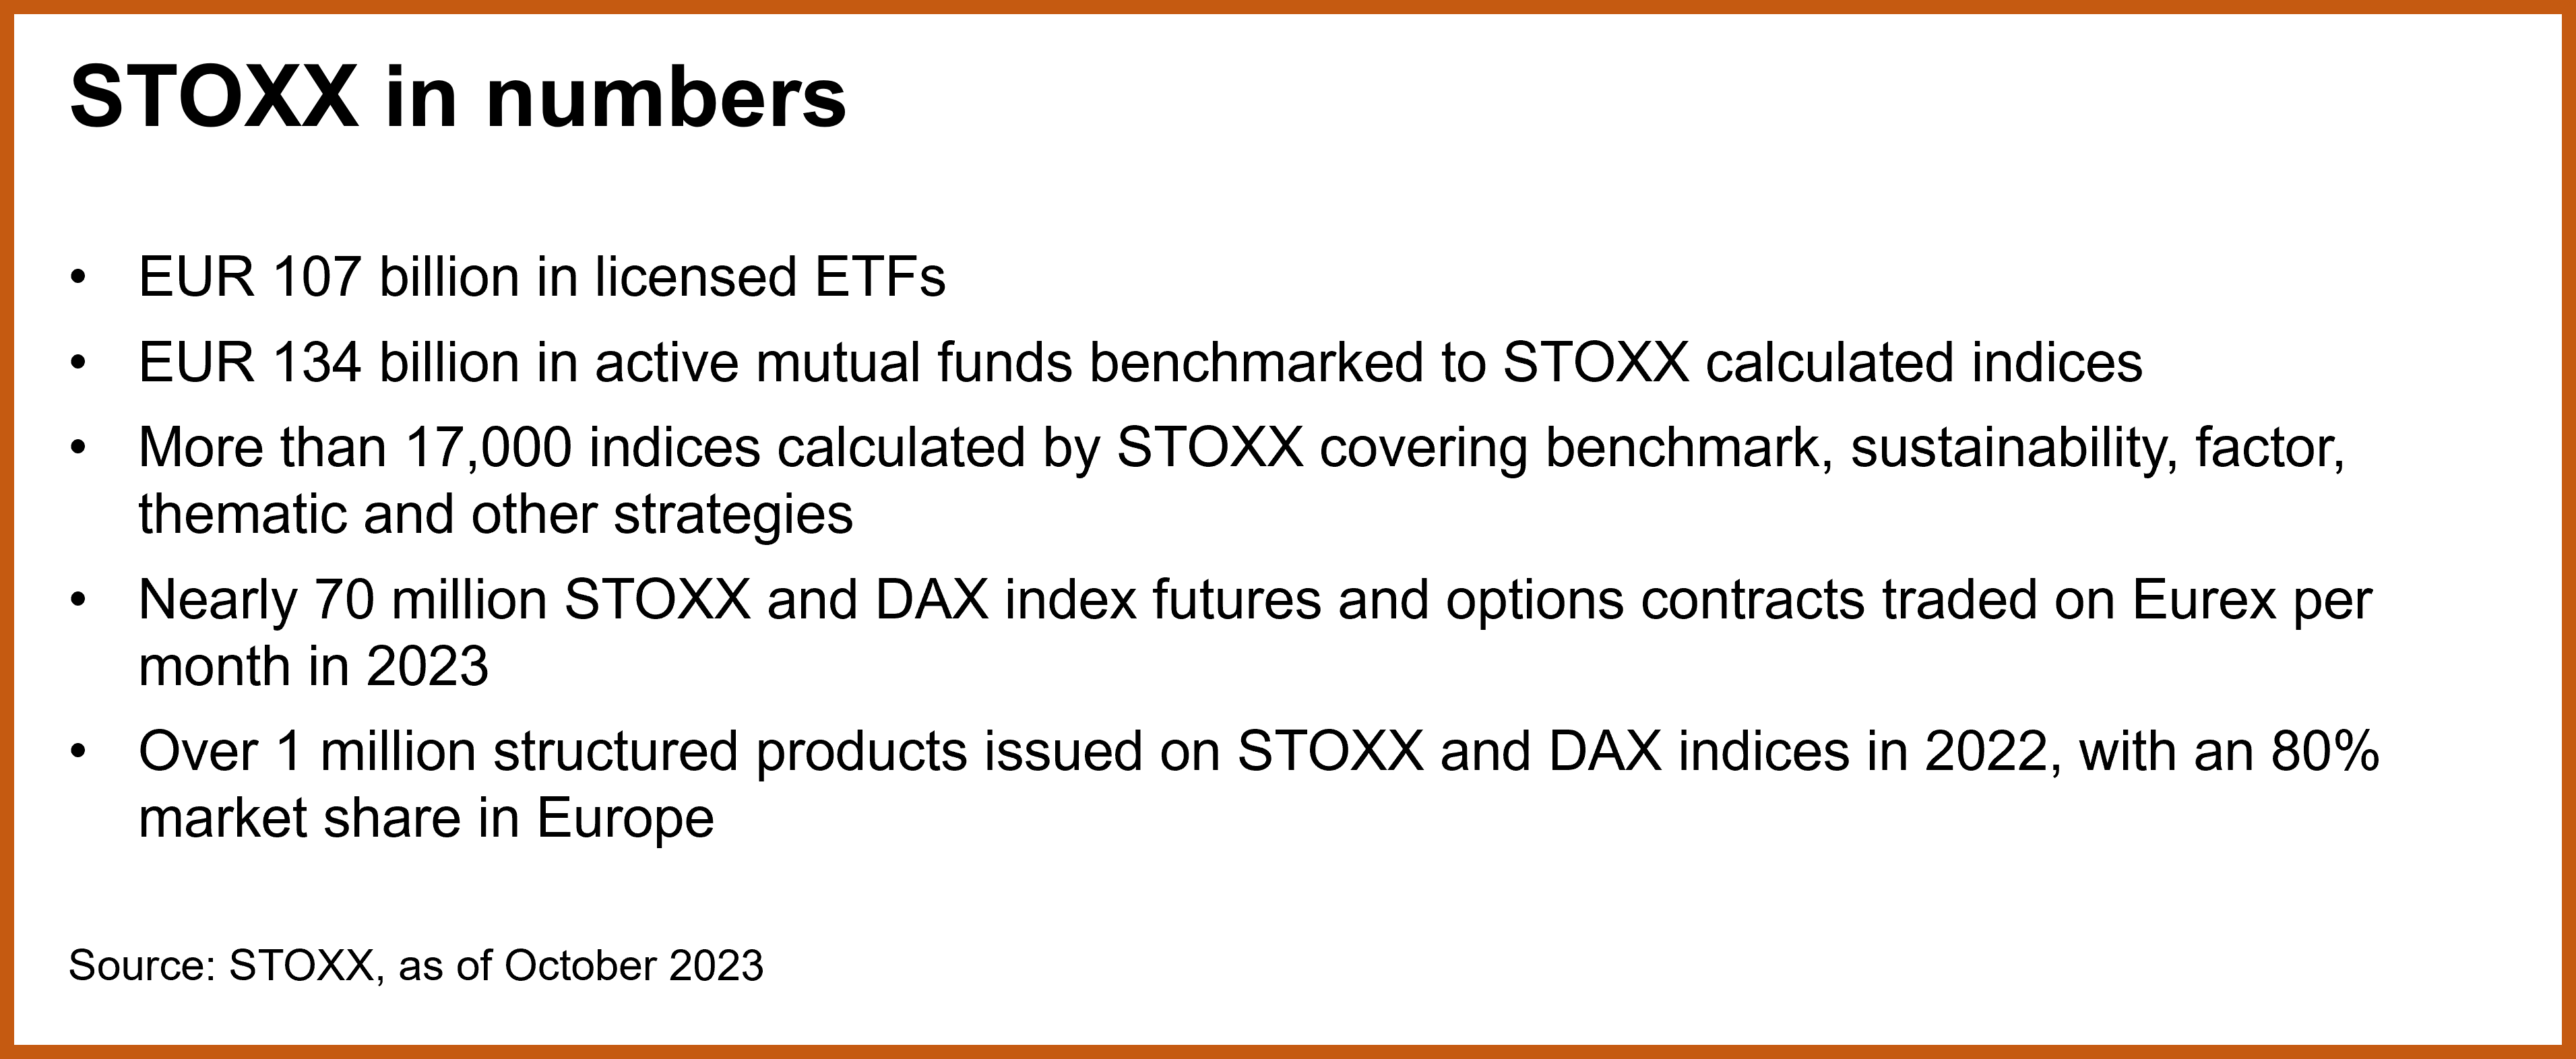 STOXX in numbers new